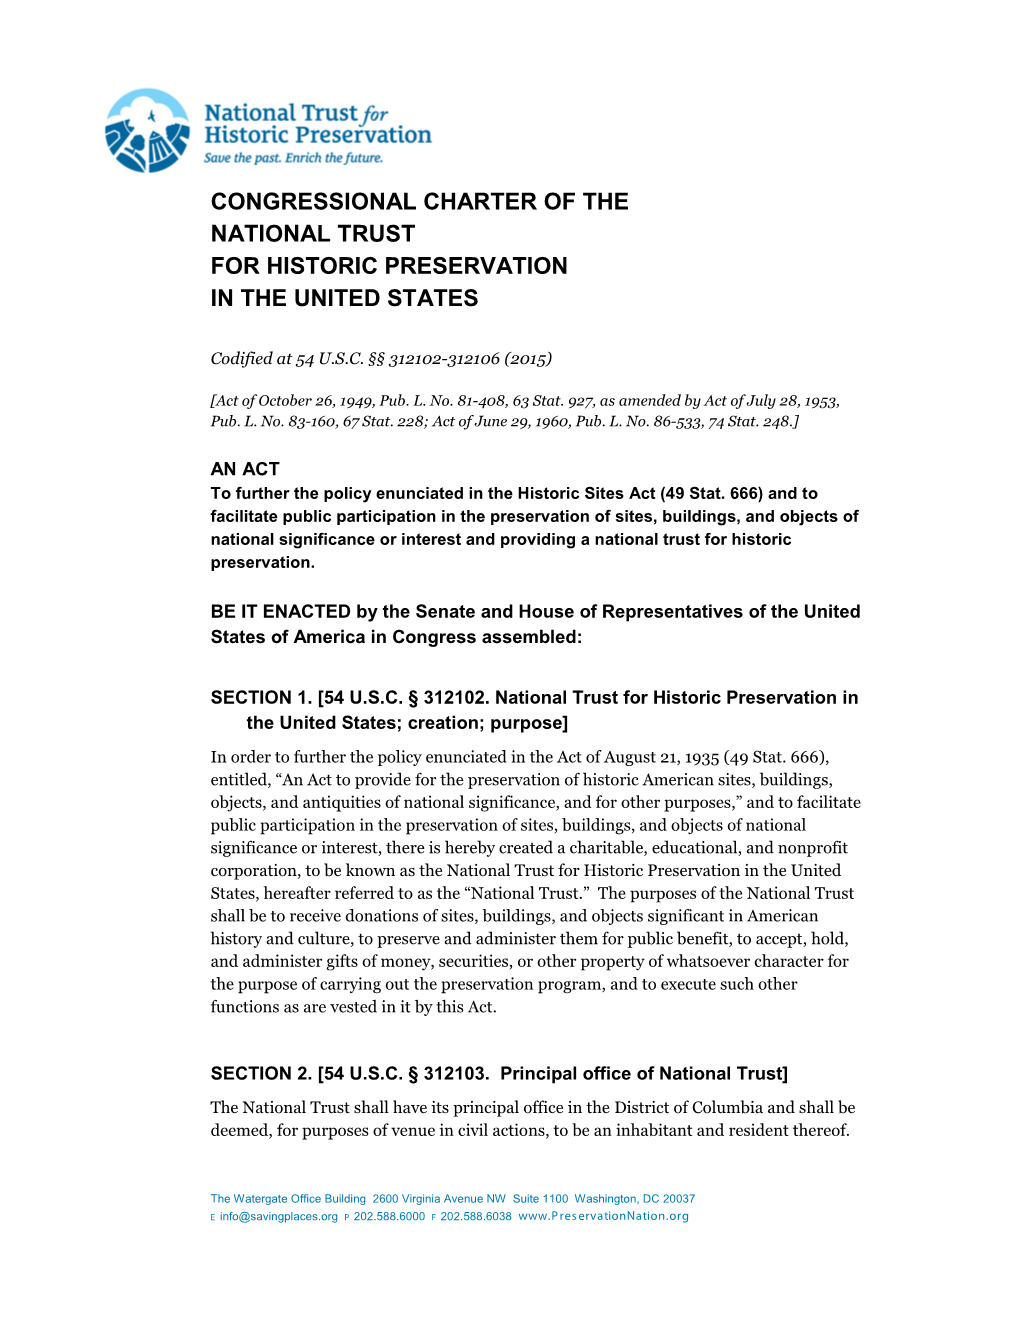 Congressional Charter of the National Trust for Historic Preservation in the United States